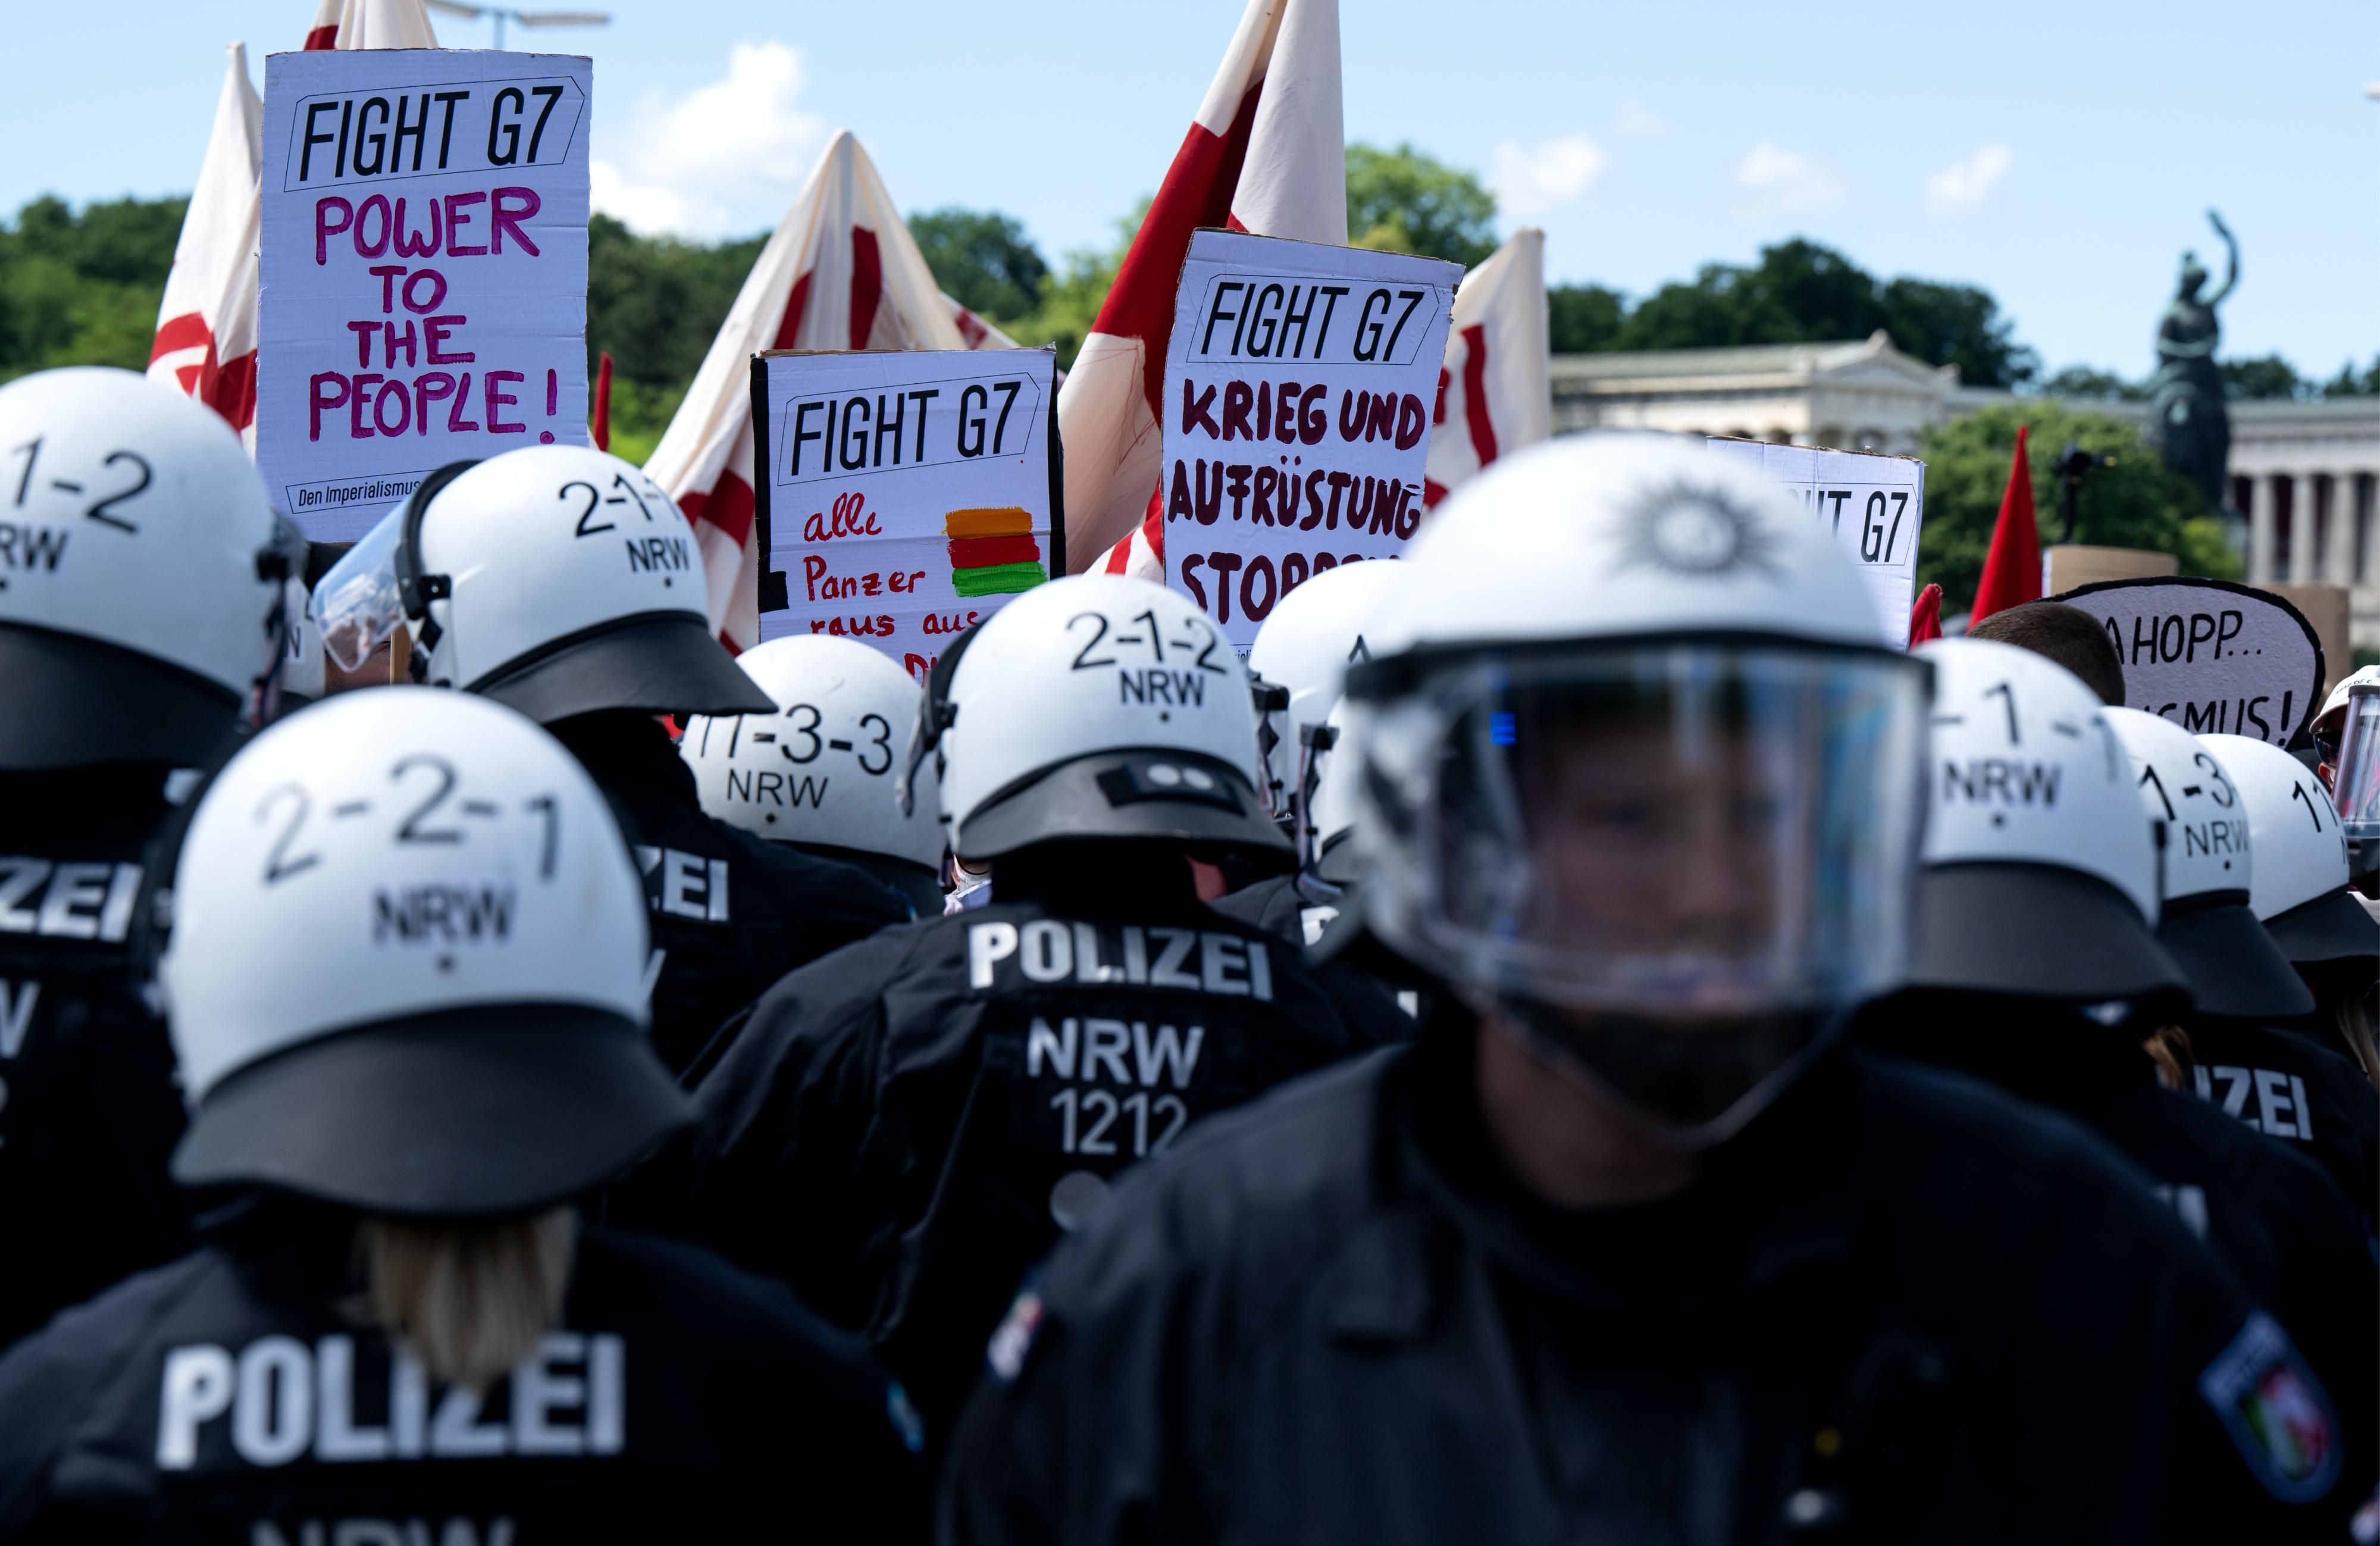 G7 protesters clash with police in Munich, Germany